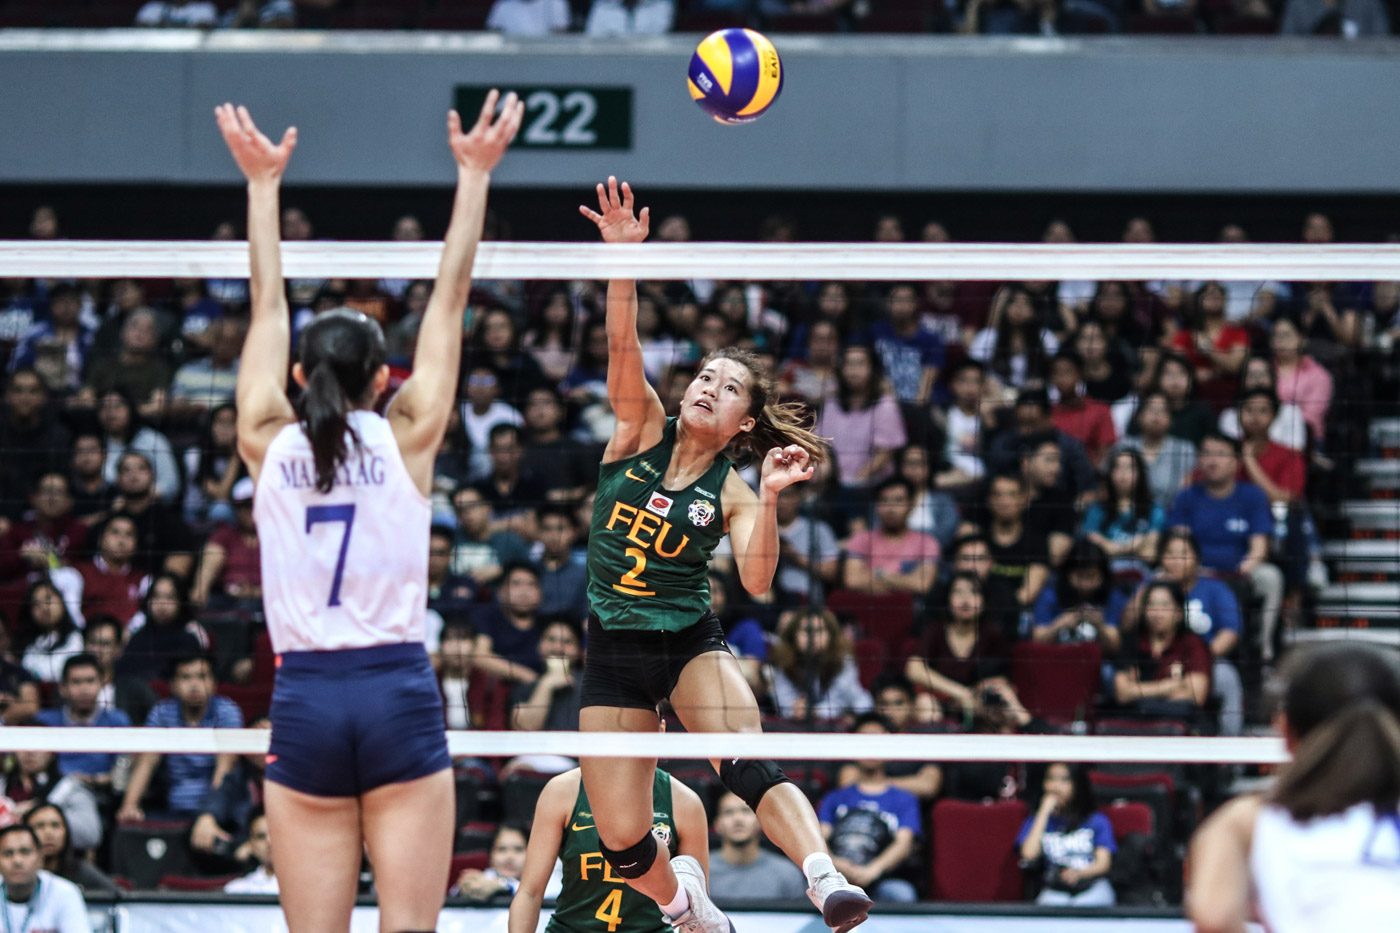 After winning first UAAP opening game, Pons’ advice: ‘Walang mag-iingat’